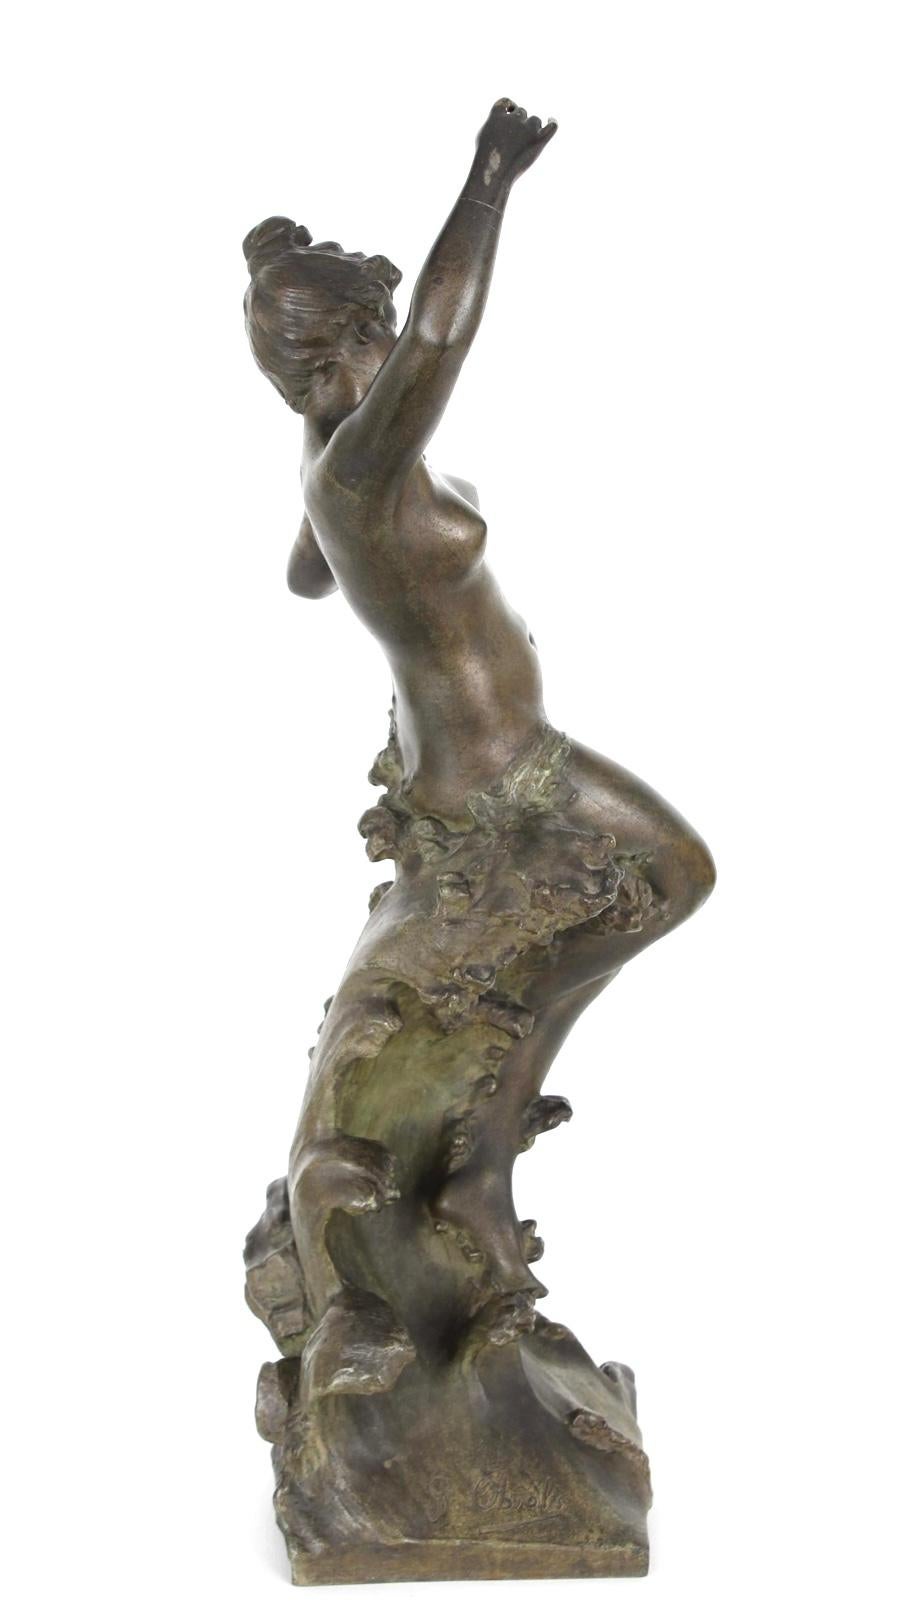 Art Deco French Bronz Sculpture of Sea Nymph After Gustavo Obiols (1858-1910) For Sale